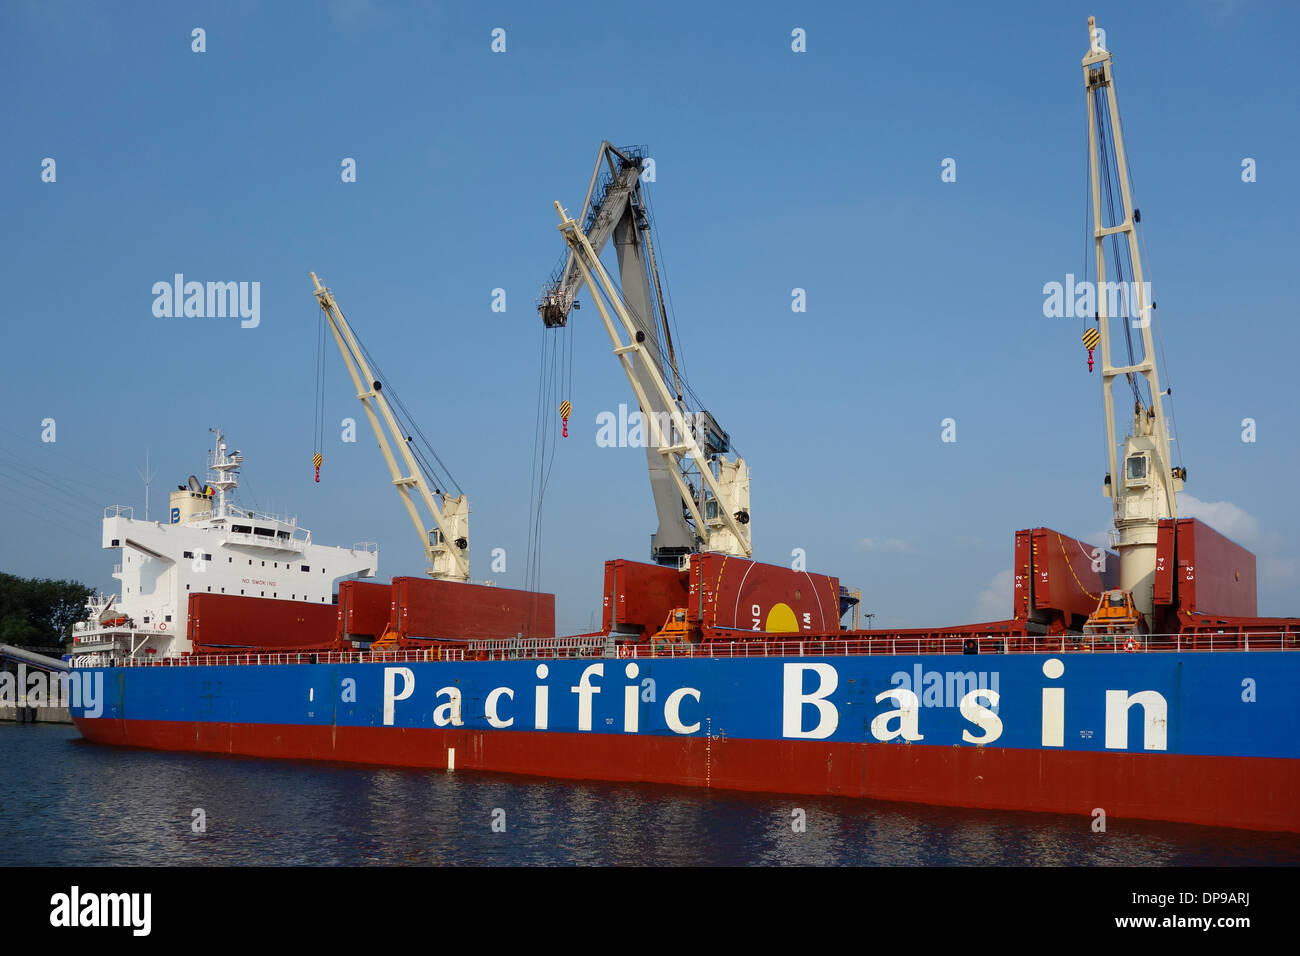 Pacific Basin bulk carrier docked at SEA-invest / Ghent Coal Terminal / GCT at the port of Ghent, East Flanders, Belgium Stock Photo